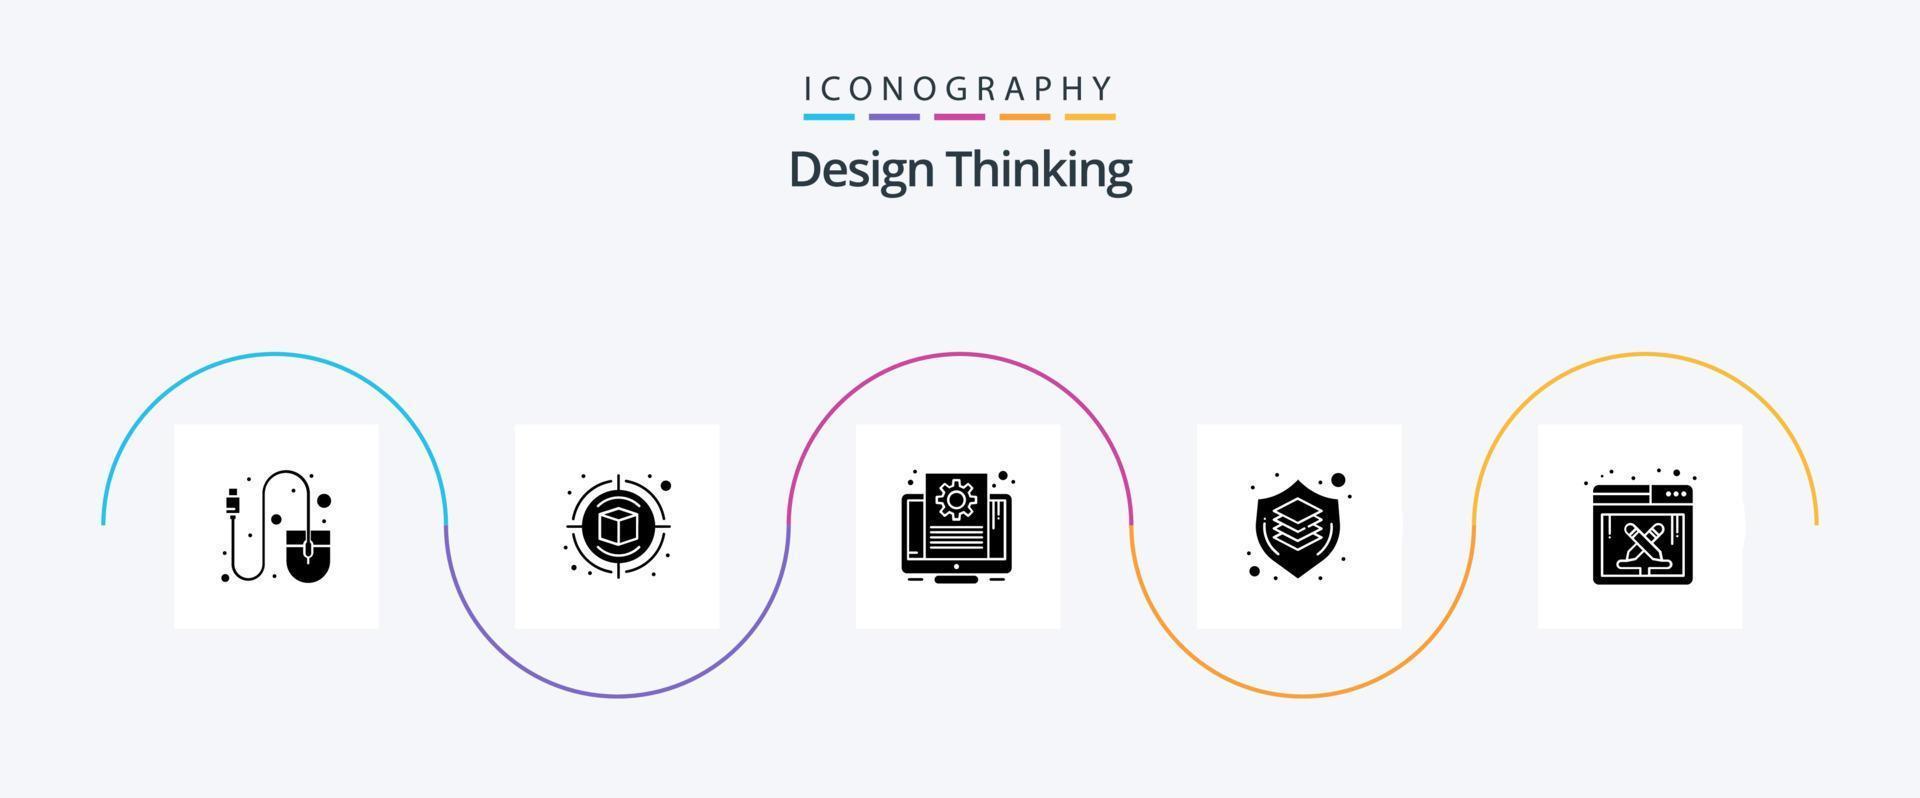 Design Thinking Glyph 5 Icon Pack Including design. shield. document. graphic. brain vector